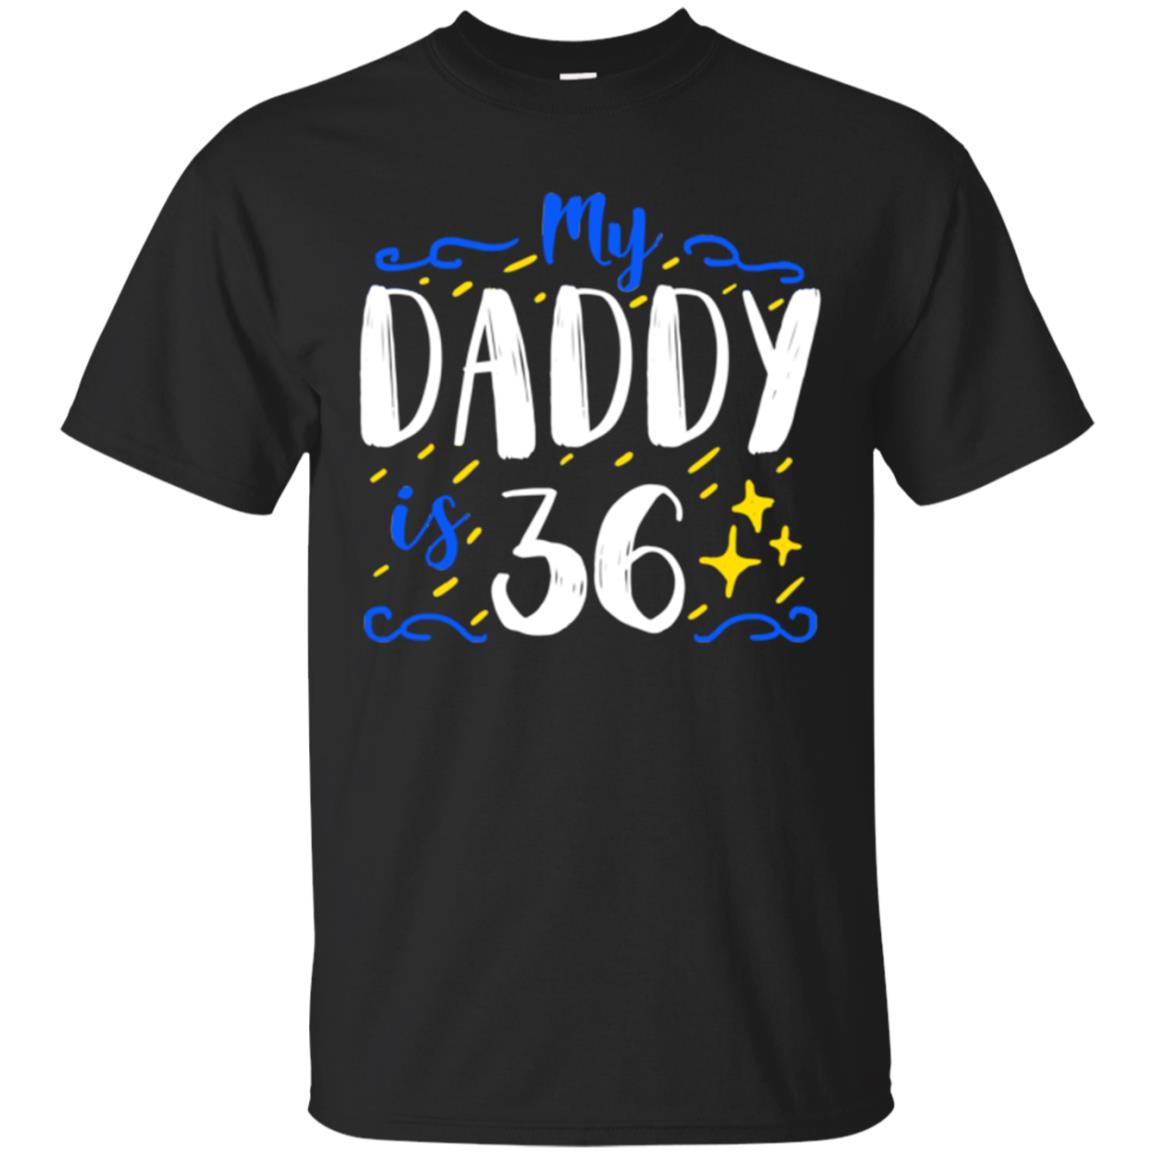 My Daddy Is 36 36th Birthday Daddy Shirt For Sons Or DaughtersG200 Gildan Ultra Cotton T-Shirt